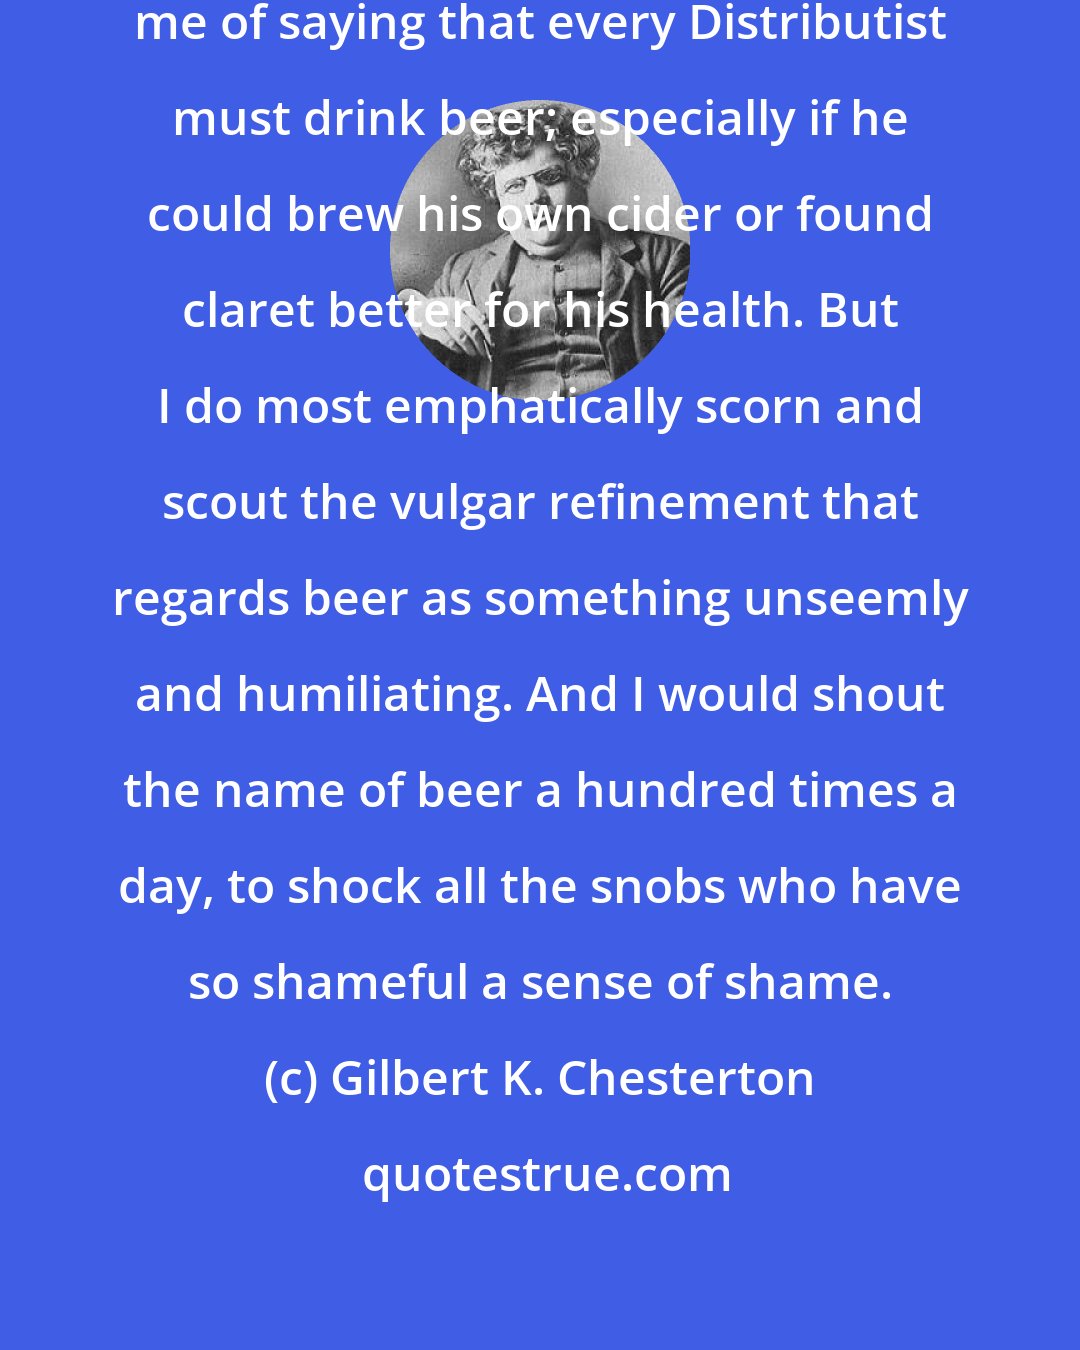 Gilbert K. Chesterton: No sane person, I hope, would accuse me of saying that every Distributist must drink beer; especially if he could brew his own cider or found claret better for his health. But I do most emphatically scorn and scout the vulgar refinement that regards beer as something unseemly and humiliating. And I would shout the name of beer a hundred times a day, to shock all the snobs who have so shameful a sense of shame.